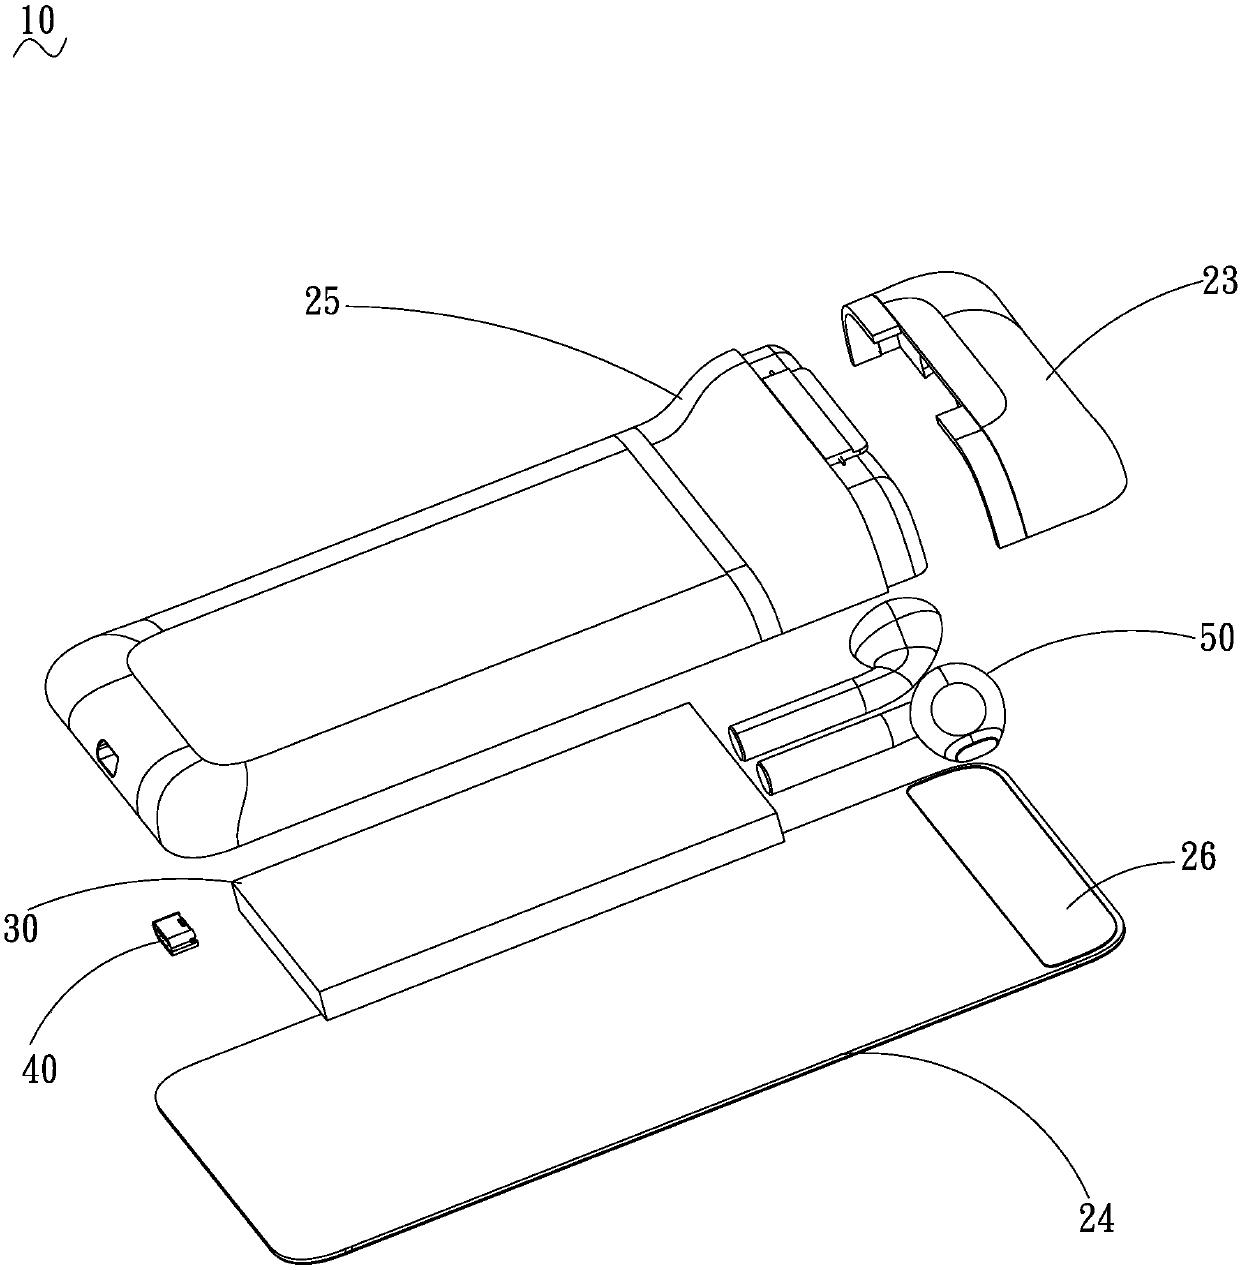 Back clamp battery and protection sleeve assembly